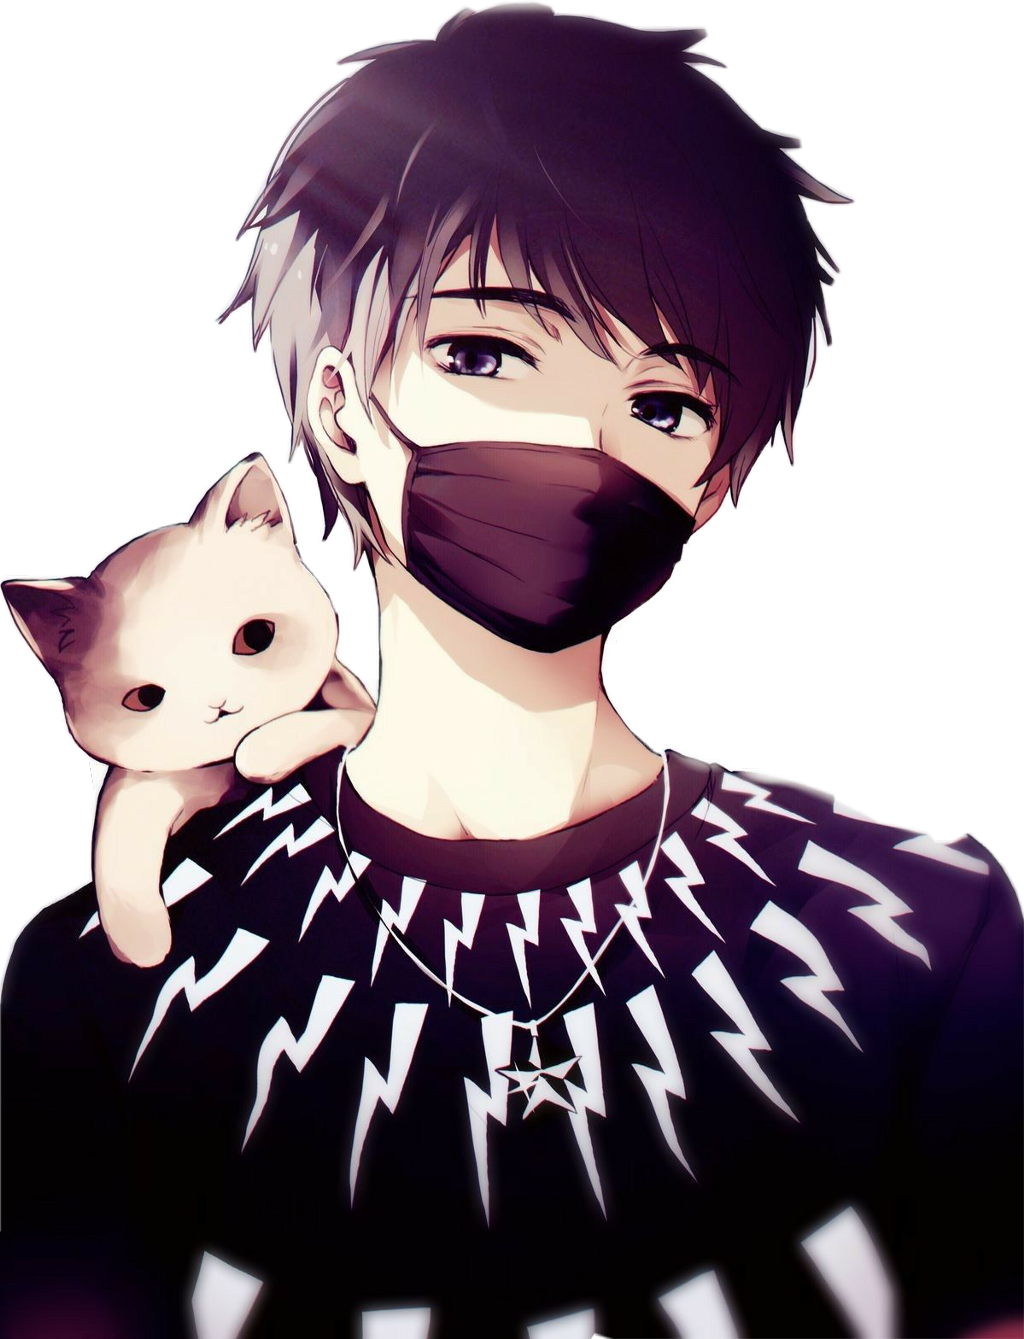 Aesthetic Anime Boy PNG Transparent HD Photo | PNG Mart